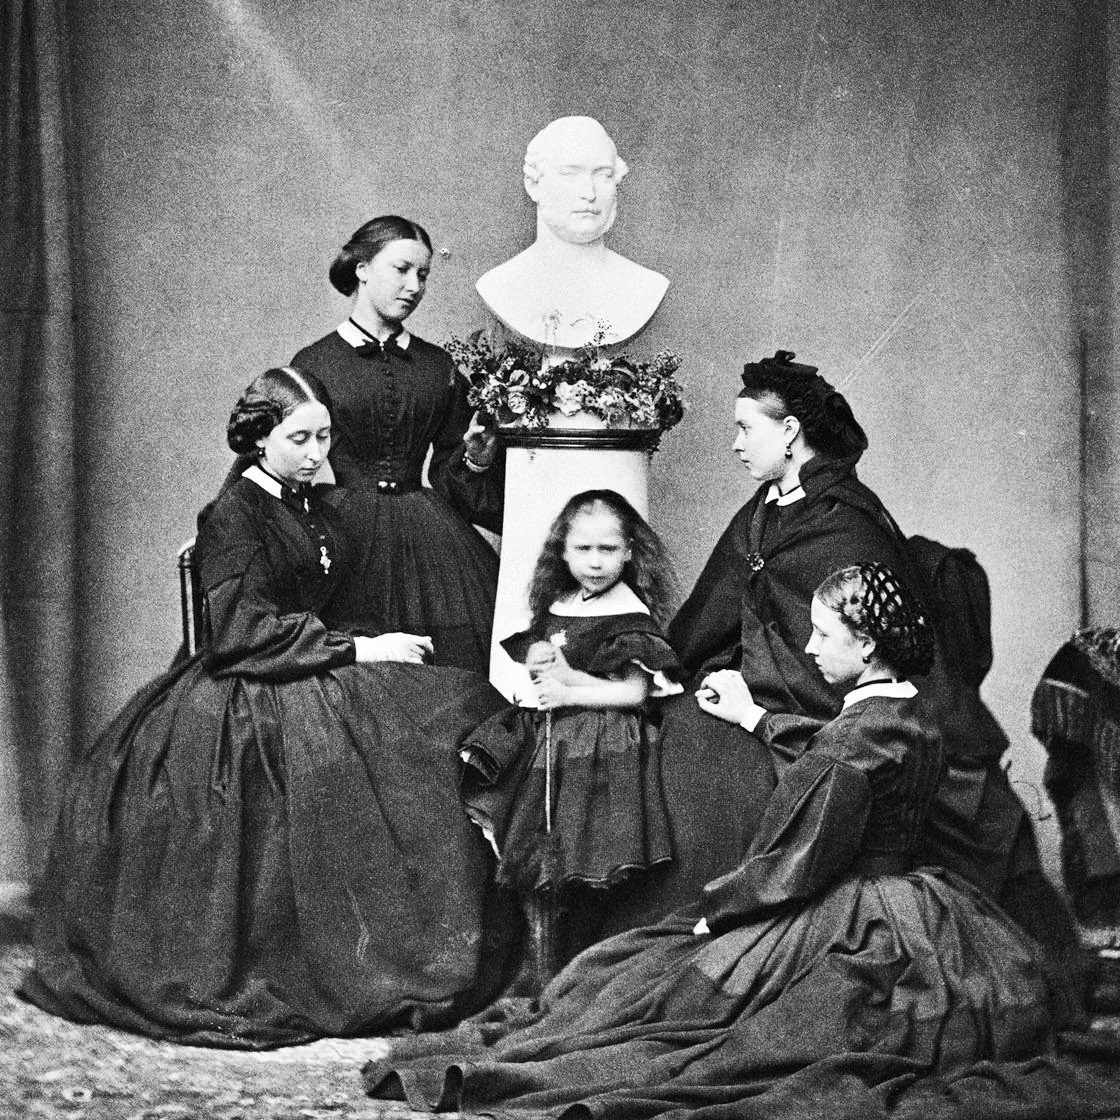 The children of Prince Albert in mourning attire, the Royal Family that exemplified the ideals of the mourning traditions of the time. 